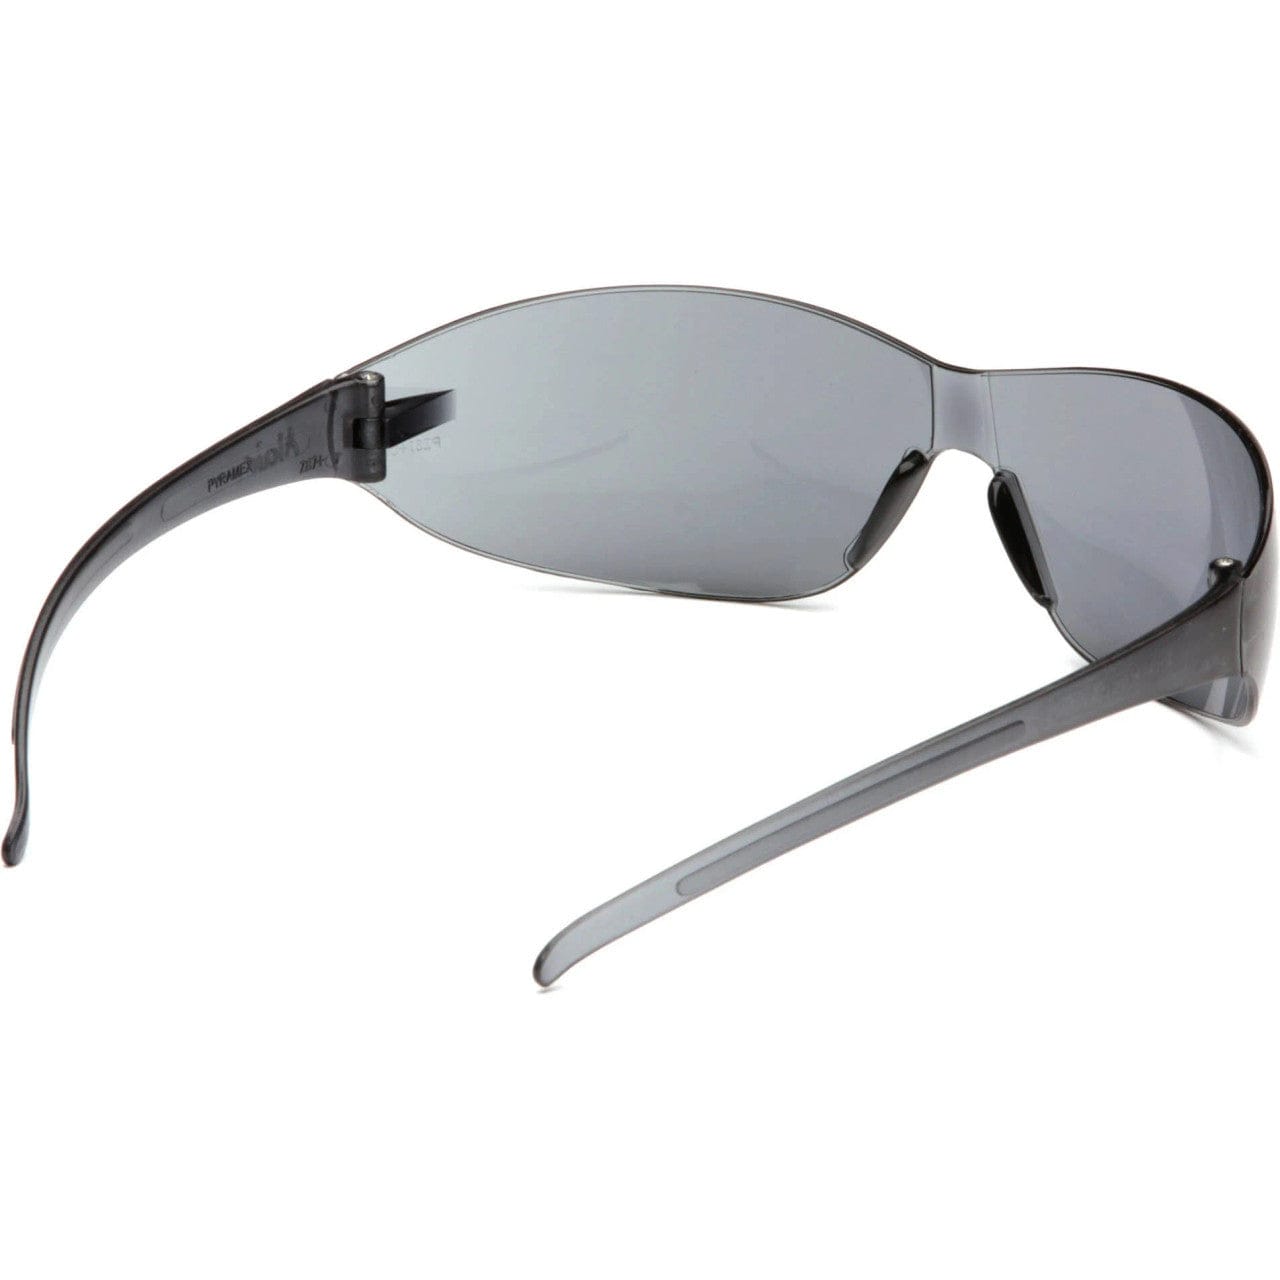 Pyramex Alair Safety Glasses with Gray Lens S3220S Inside View